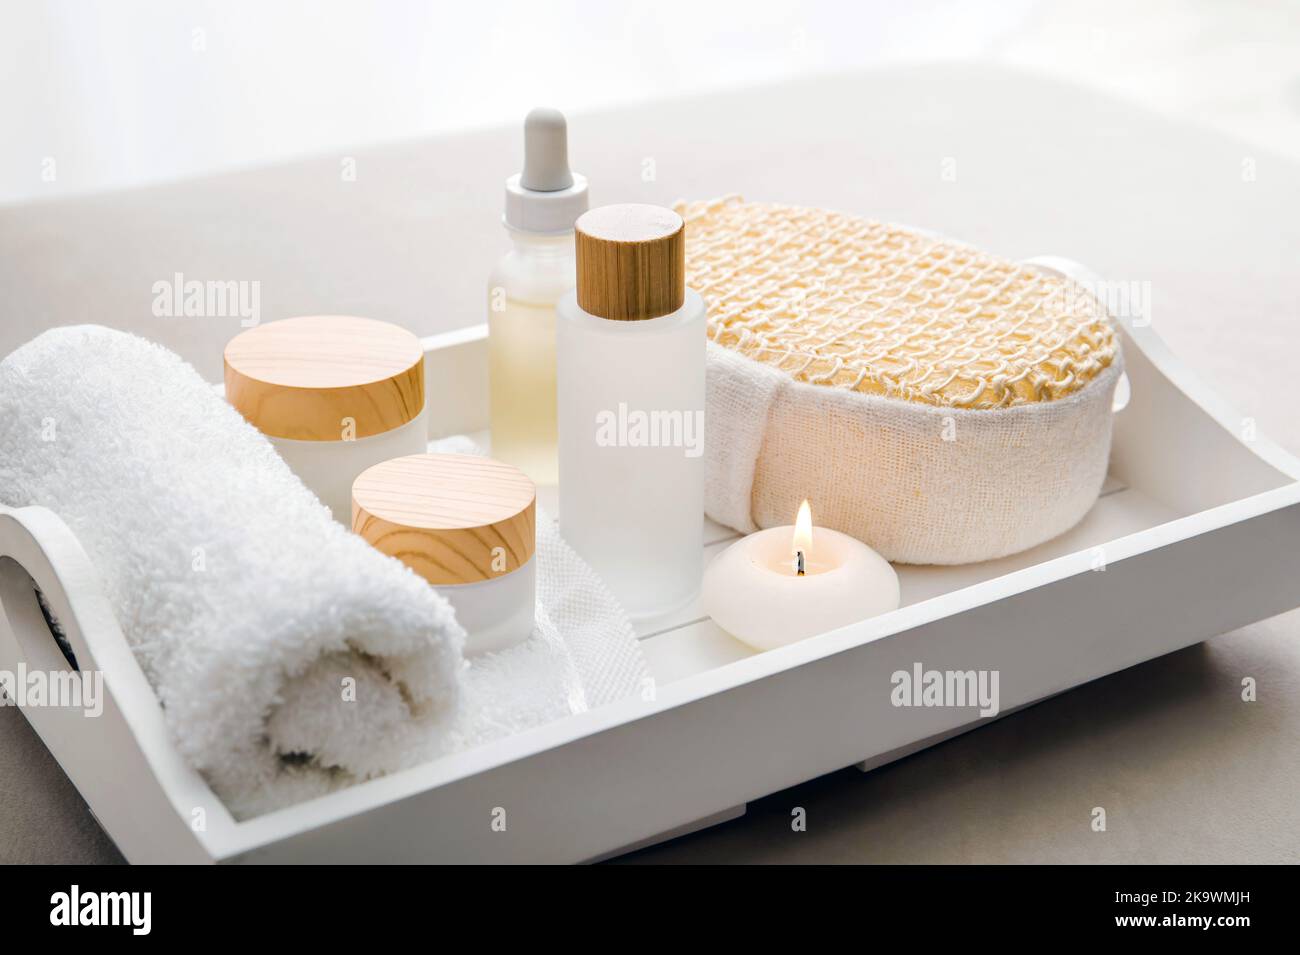 Various spa products on white tray, luxury spa relaxation concept. Massage oil, moisturizing creams, day cream, bath sponge, round candle burning. Stock Photo